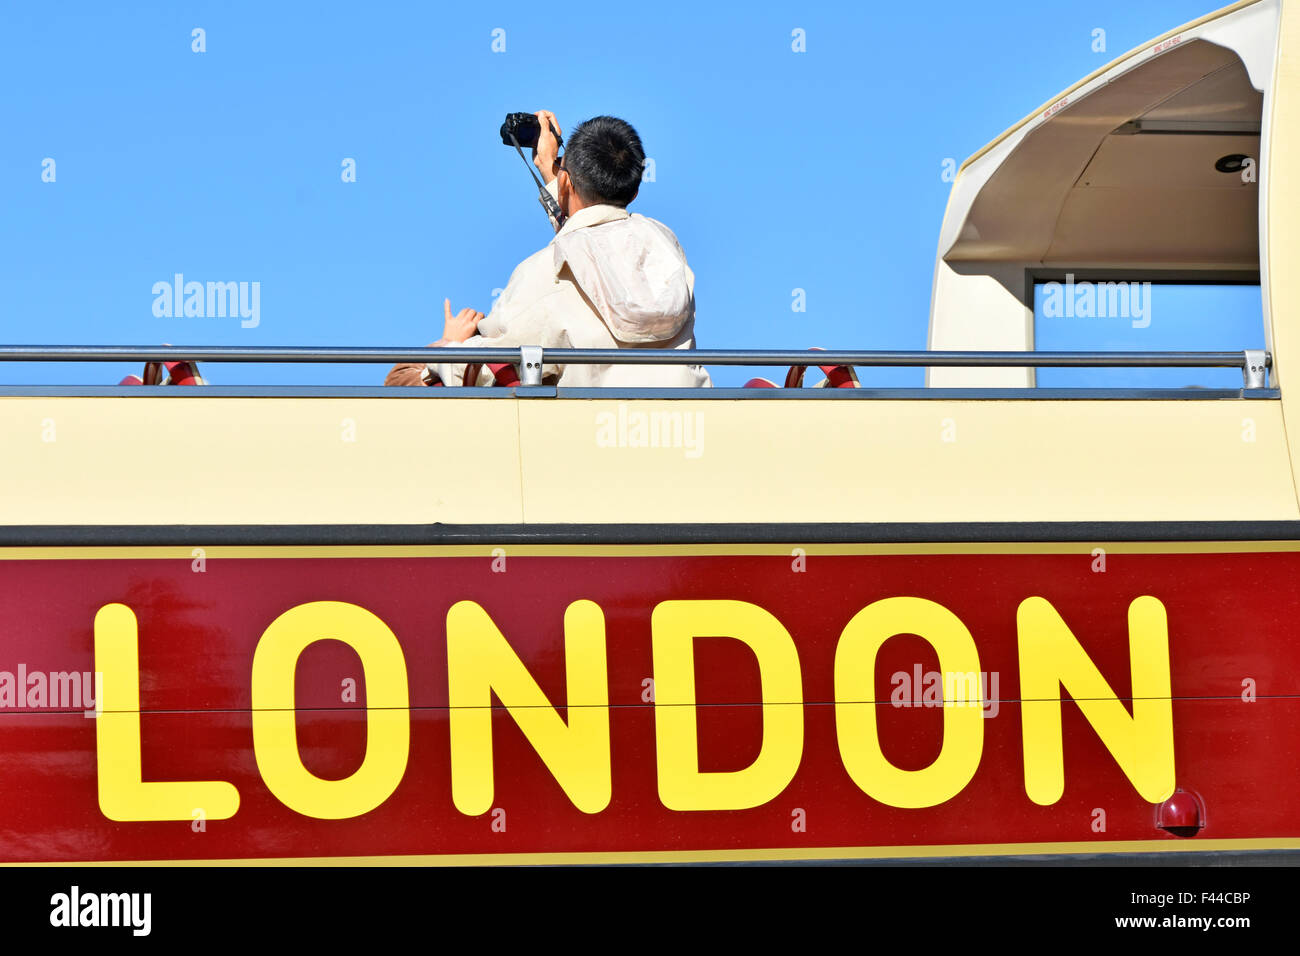 London tourist visitor photographing the sights from an open top tour bus in Trafalgar Square England UK Stock Photo